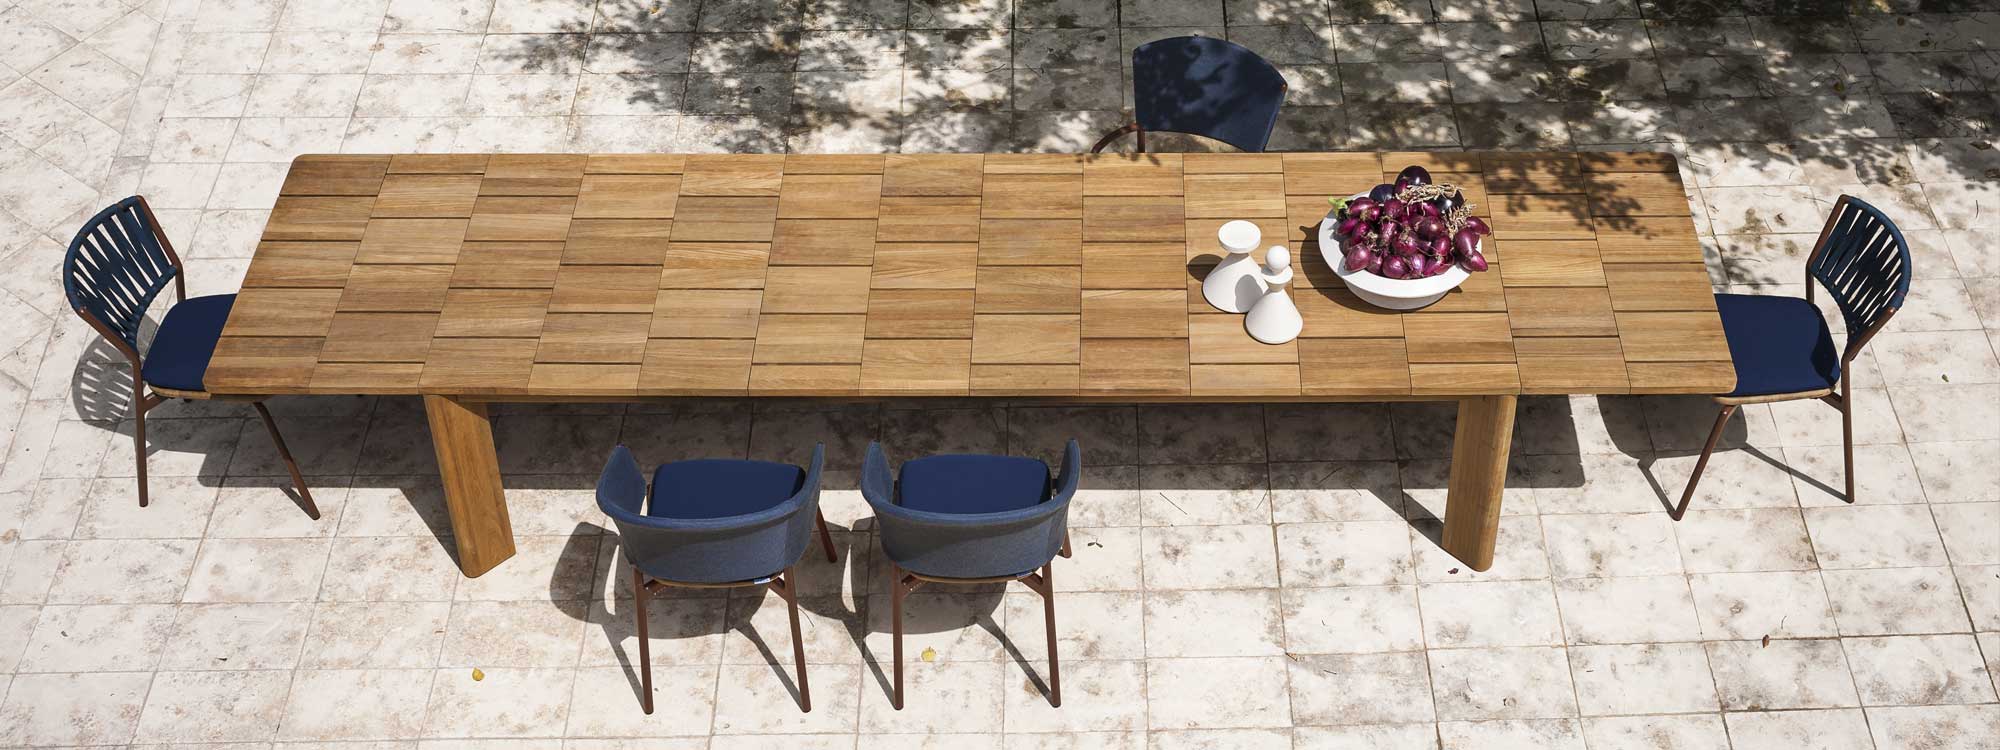 Brick extending garden dining table & solid teak outdoor table in high quality exterior furniture materials by RODA luxury outdoor furniture